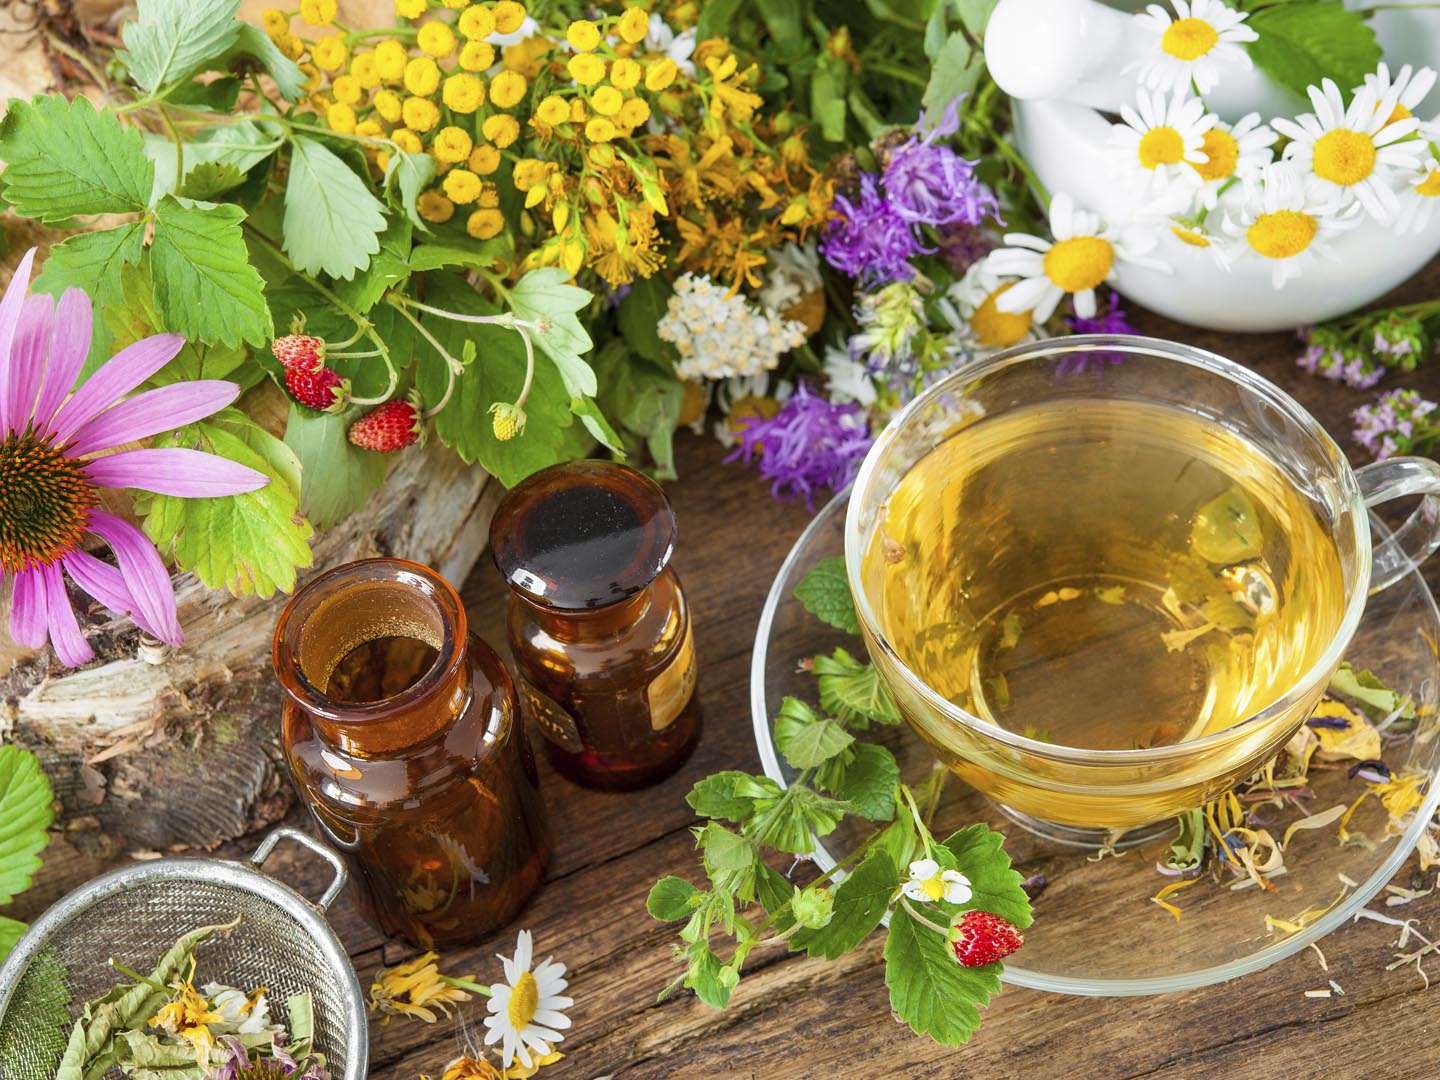 Treating Cancer With Integrative Medicine | Andrew Weil, M.D.